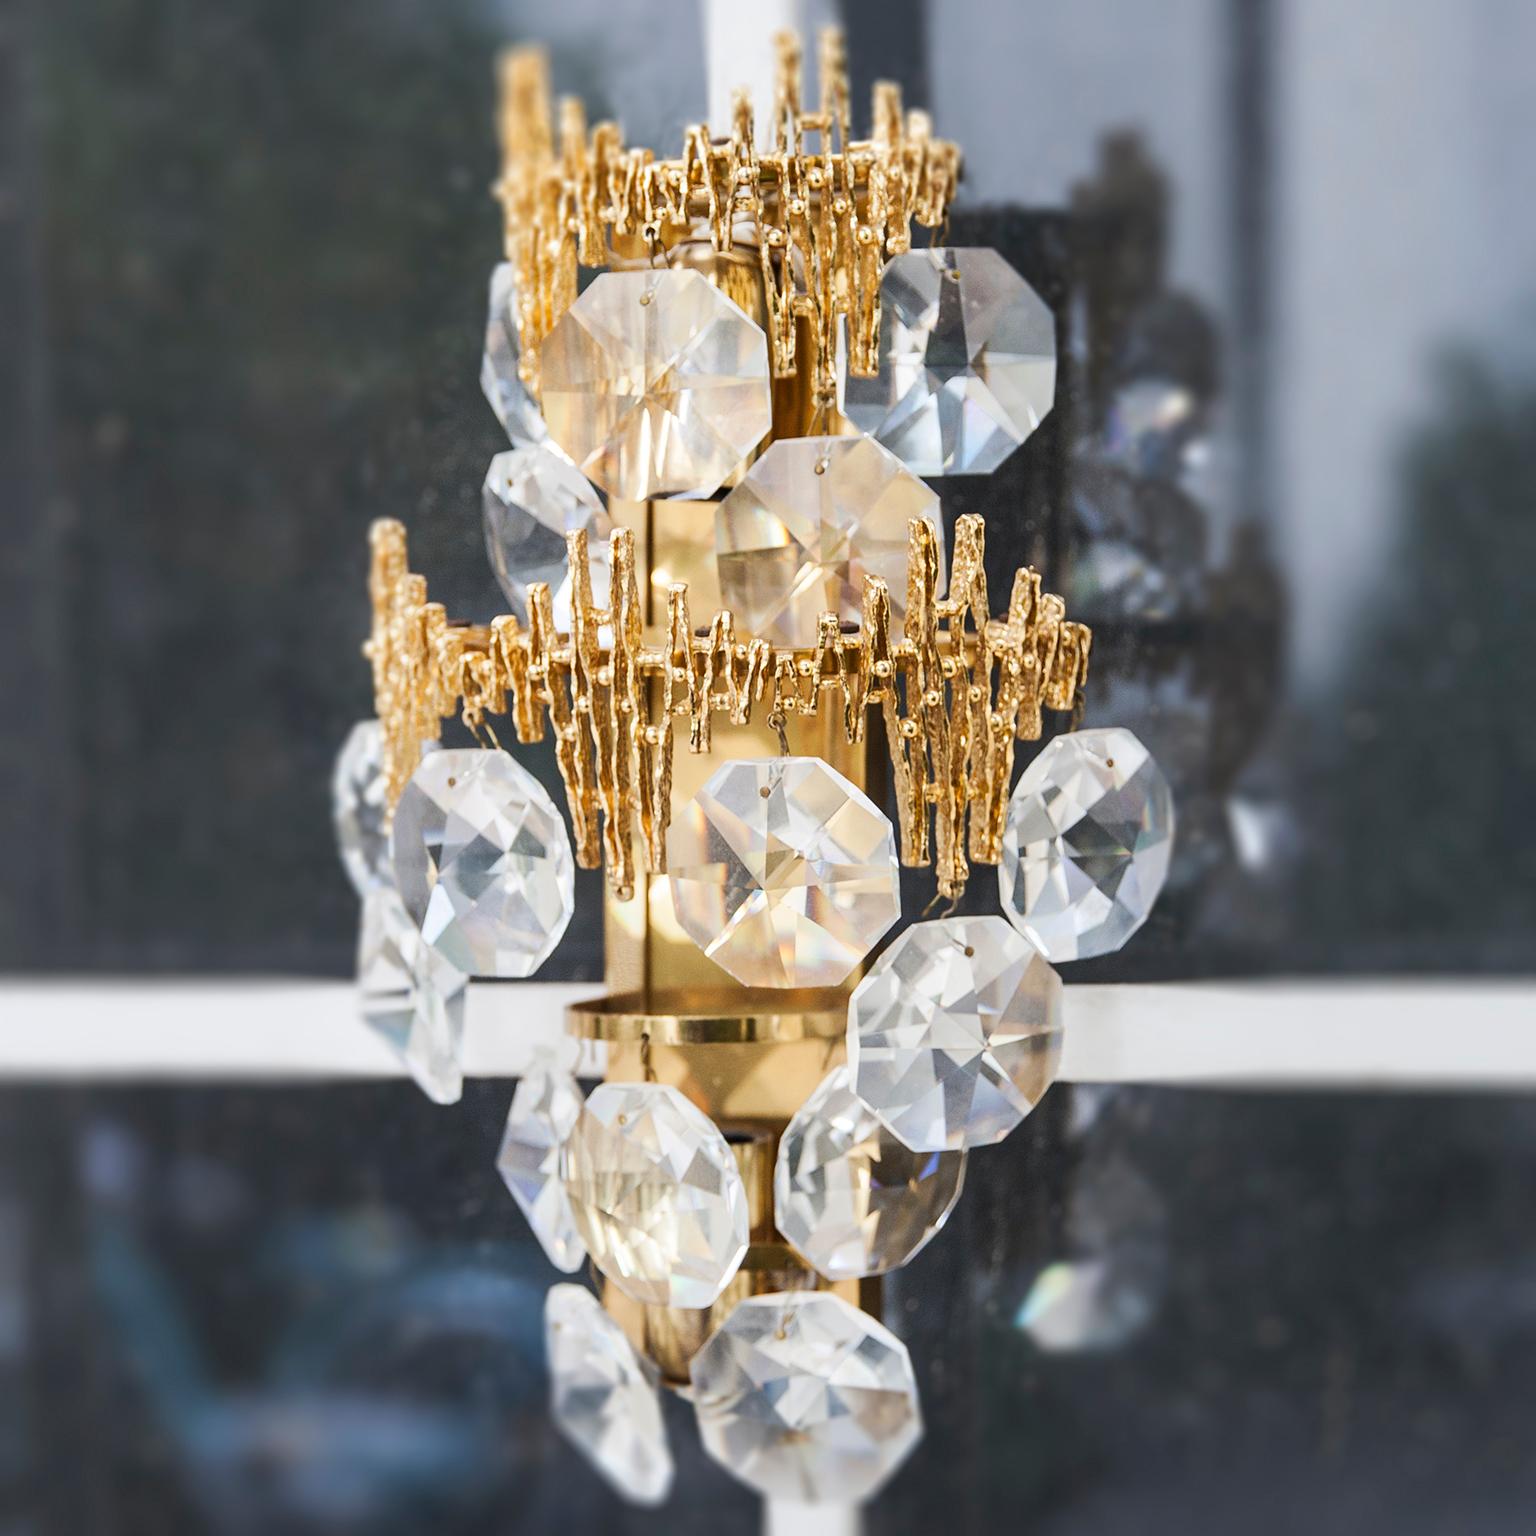 Hollywood Regency style wall light in gilt brass and with 16 glass crystals made by Palwa, Germany, 1960s. This Hollywood Regency crystal glass disc sconces, has a frame of real gilt metal. It needs two x E14 standard screw bulbs to illuminate. This